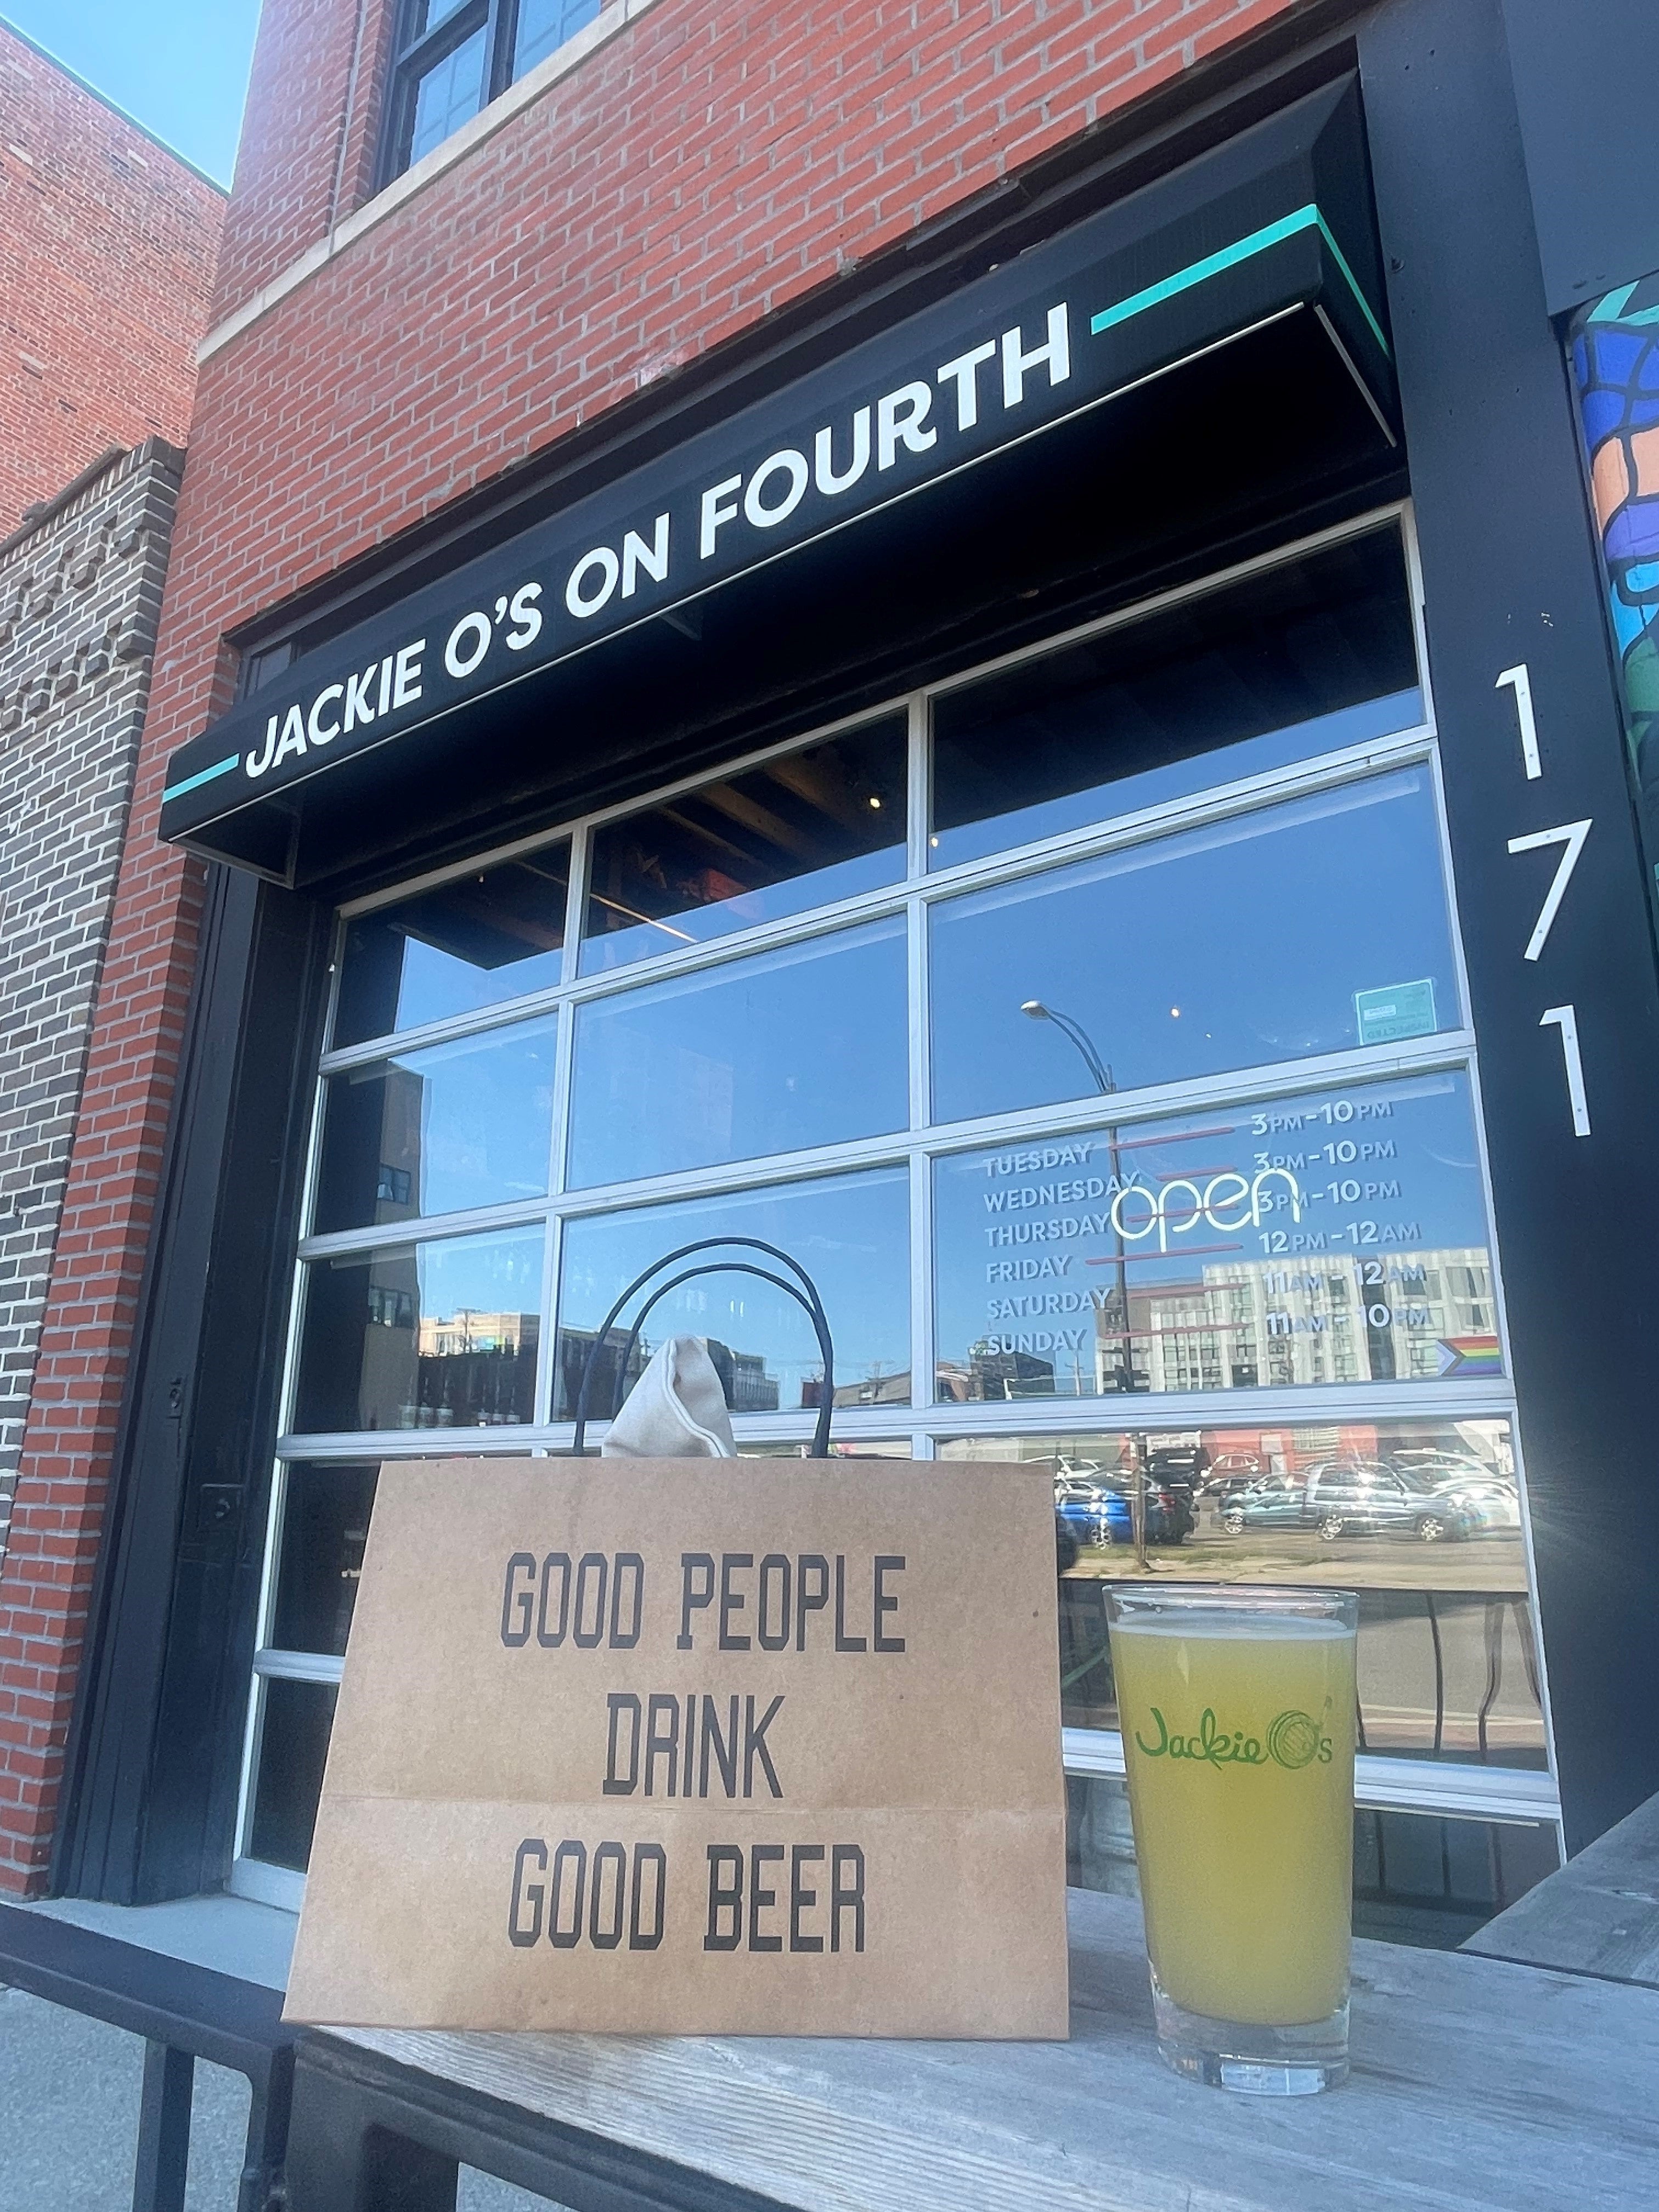 Good People Drink Good Beer Paper Caddy Bag ($100 for case of 100 bags)